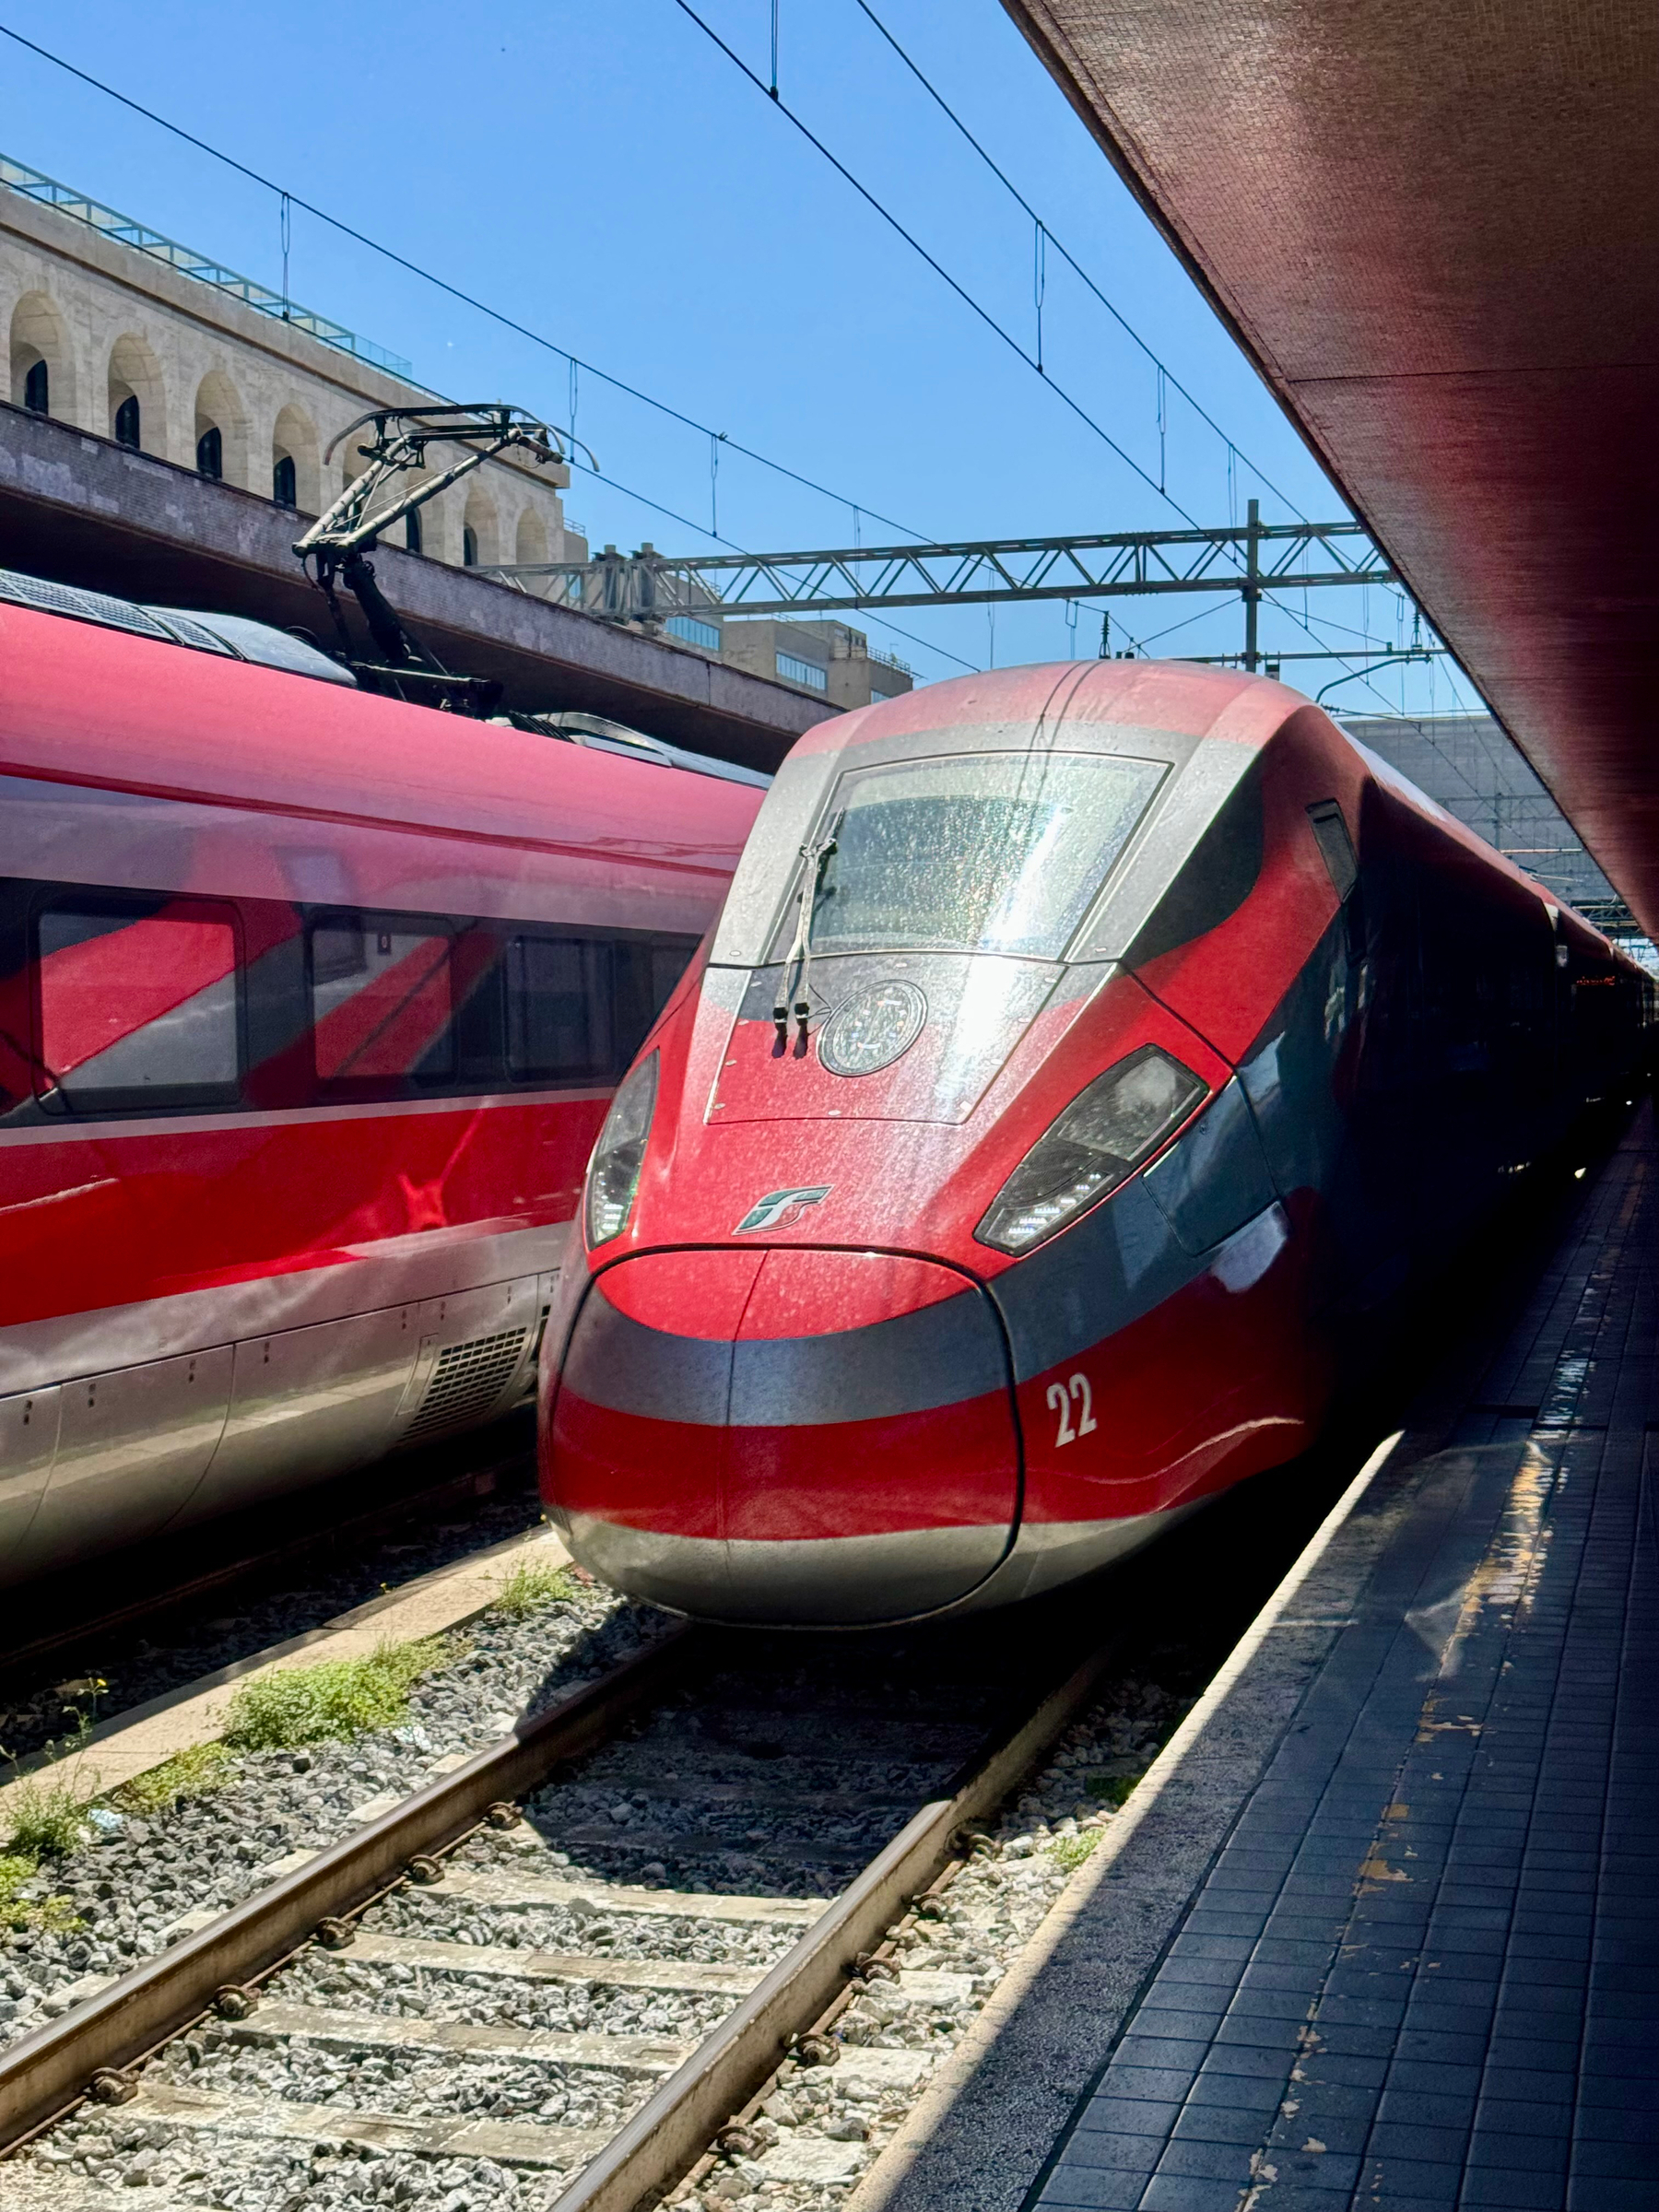 A modern high-speed train at a station platform under a clear blue sky. The train has a red and silver design, with the number “22” visible on its front. Another similar train is on an adjacent track. 